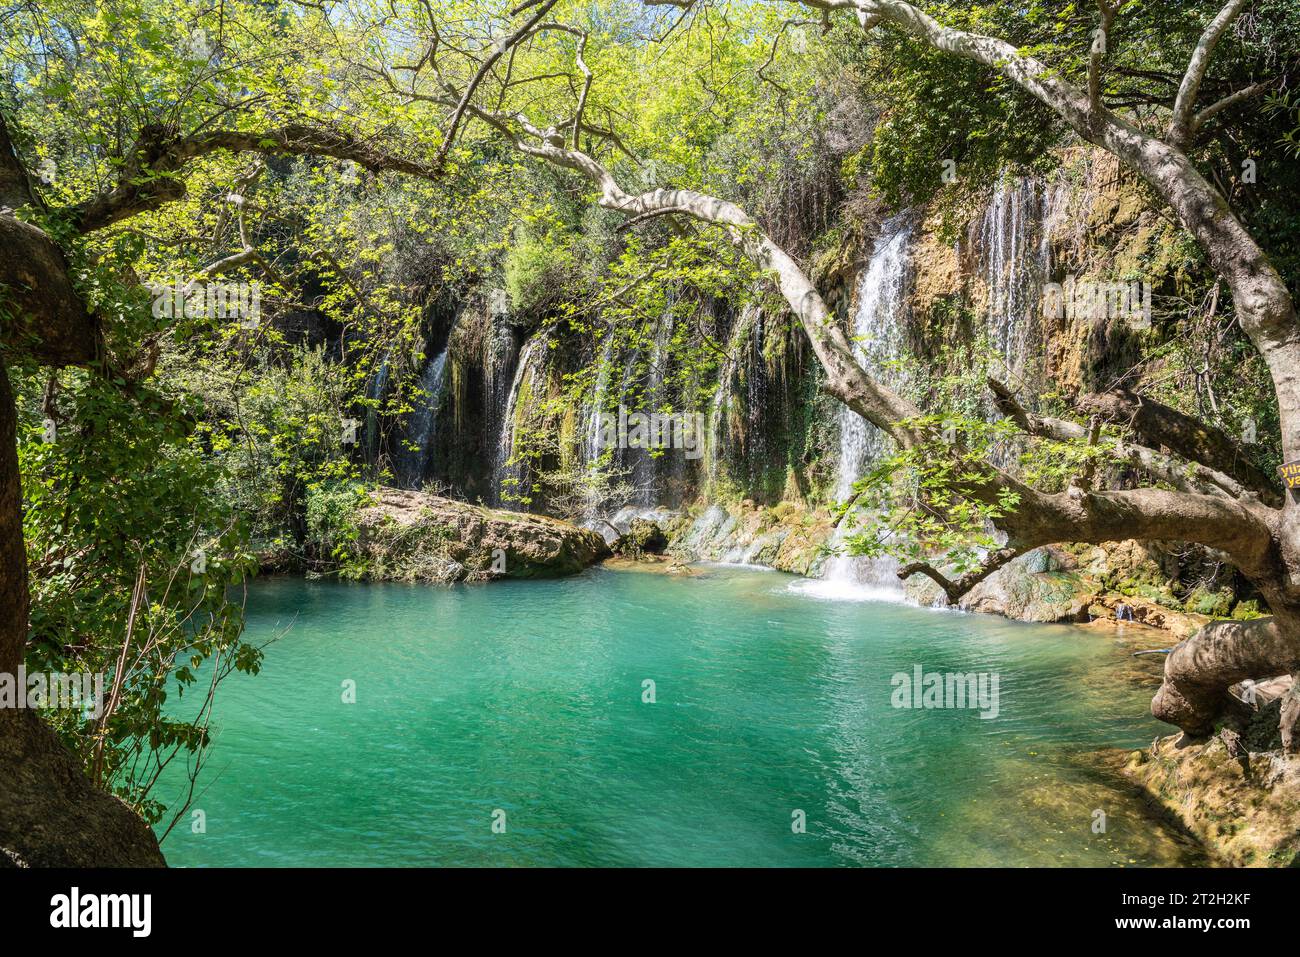 Kursunlu waterfall in Antalya, Turkey. The waterfall is on one of the tributaries of the Aksu River, where the tributary drops from Antalya's plateau Stock Photo